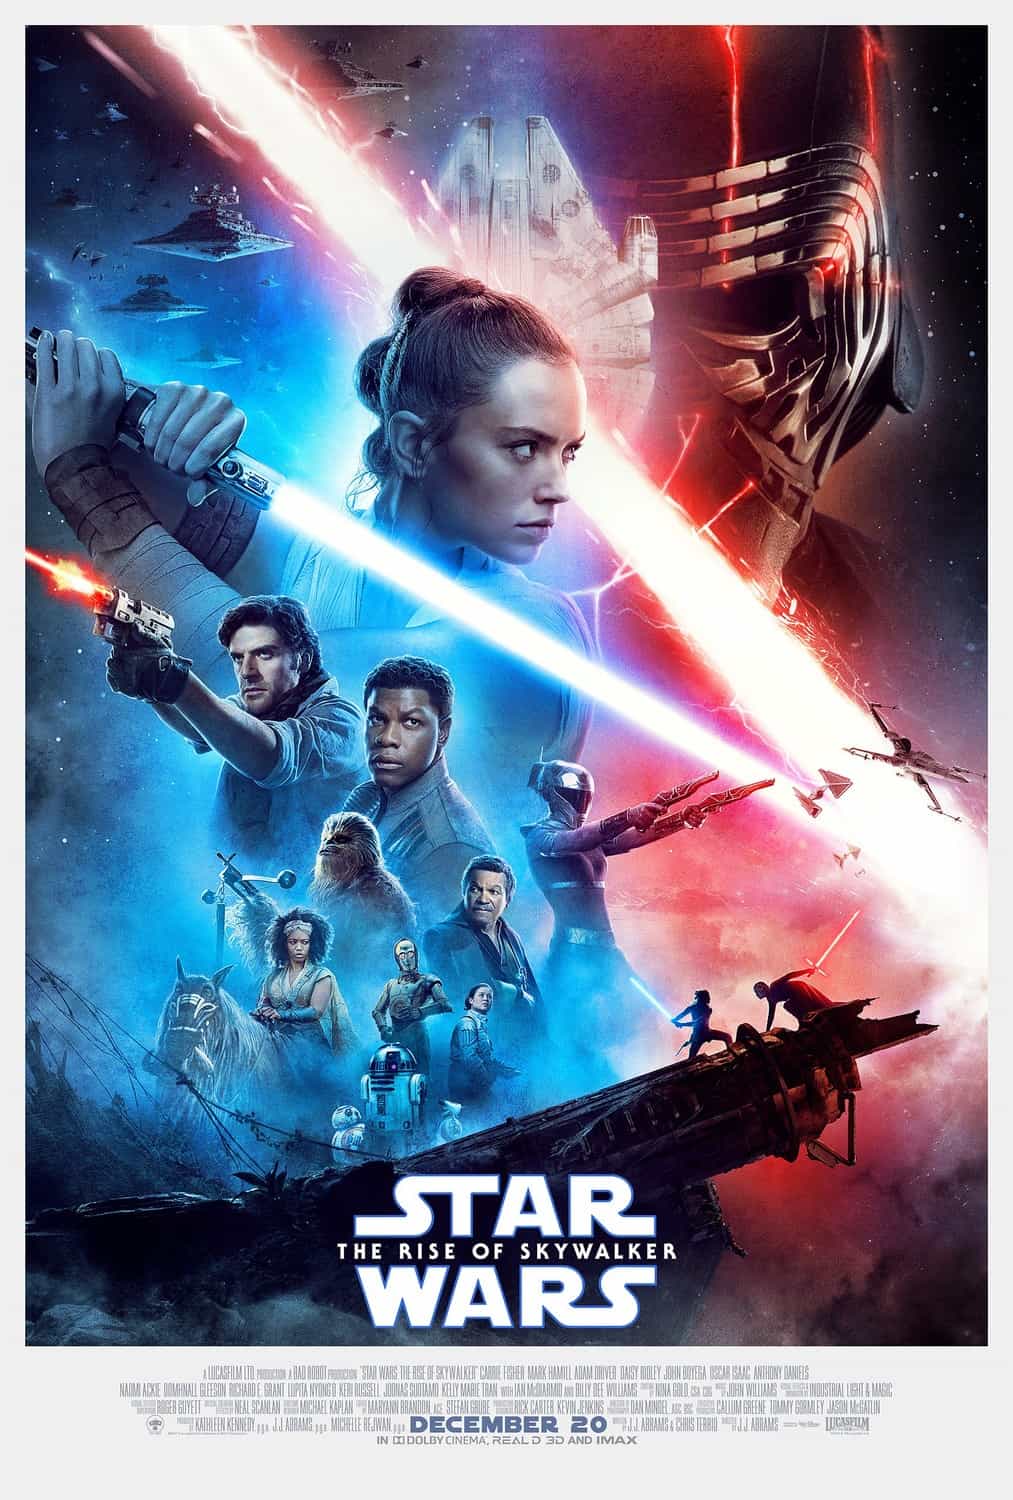 US Box Office Analysis 3 - 5 January 2020:  The Rise Of Skywalker remains at the top while The Grudge remake is the top new film at 4